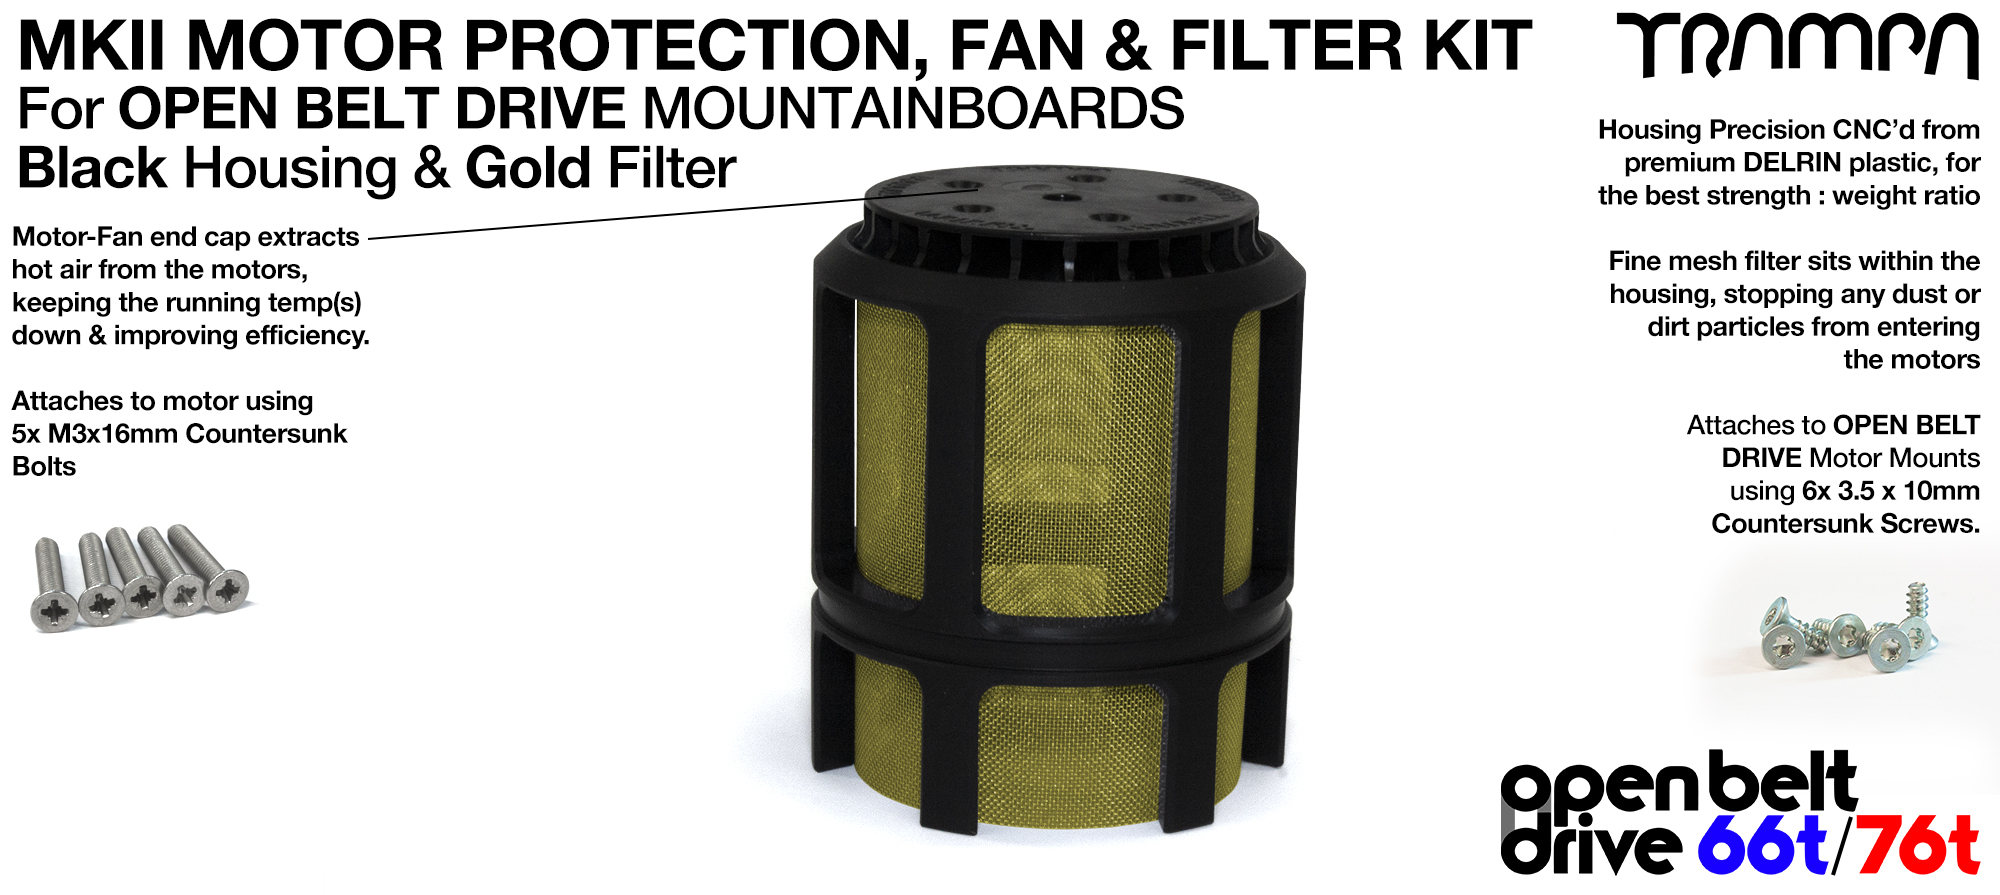 FULL CAGE Motor protection SUPER STRONG DELRIN Plastic includes Fan & GOLD Filter - SINGLE